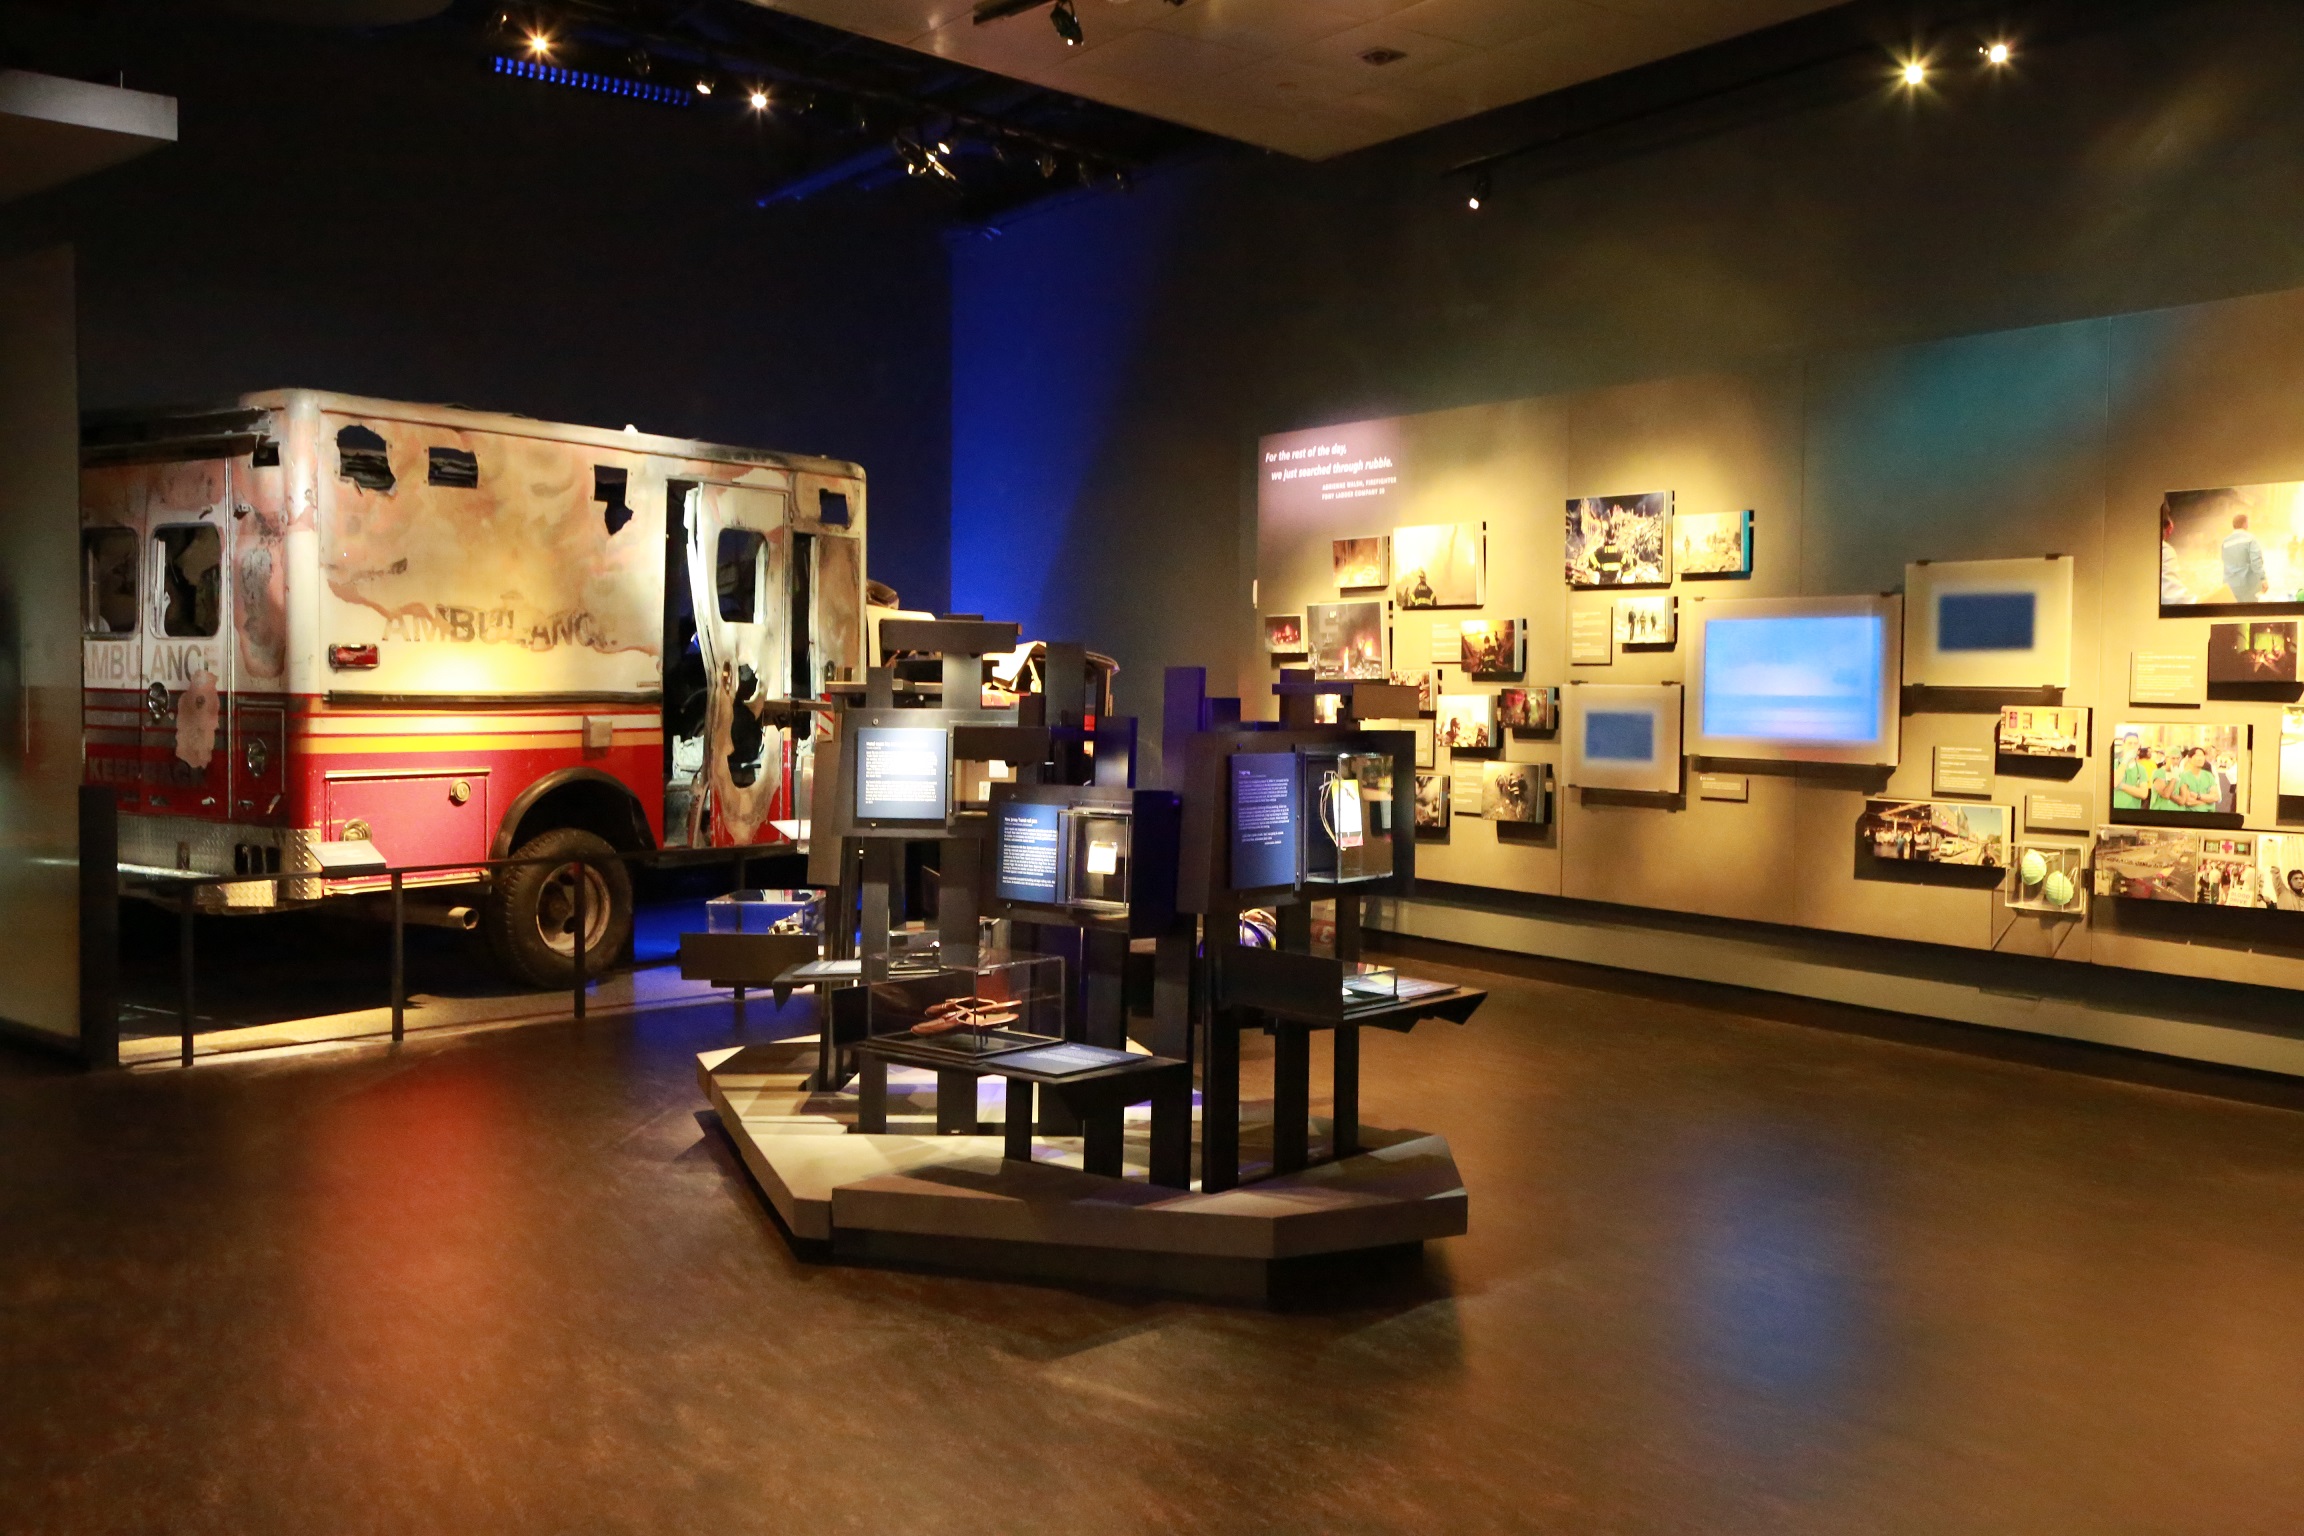 A section of the Museum’s Historical Exhibition is seen without any visitors. A damaged FDNY ambulance sits off to the right, while various images and interactive screens are on a wall to the right.